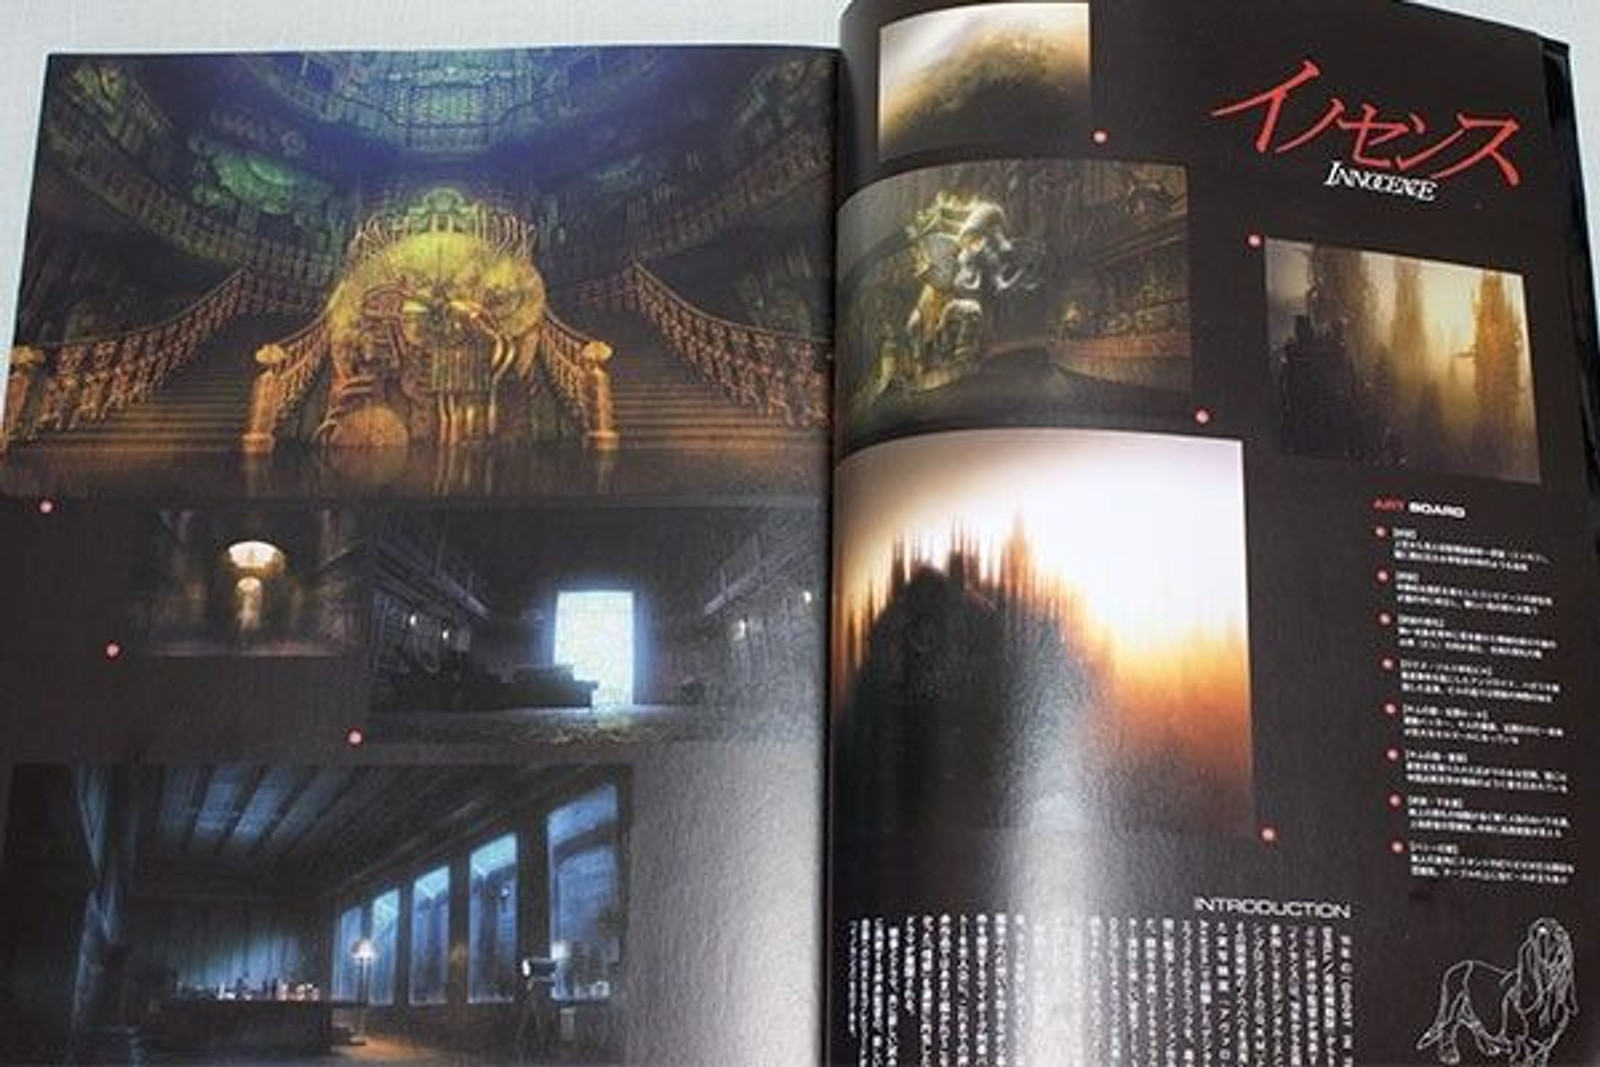 Works of Mamoru Oshii Guide Book Innocence Ghost in the Shell JAPAN ANIME